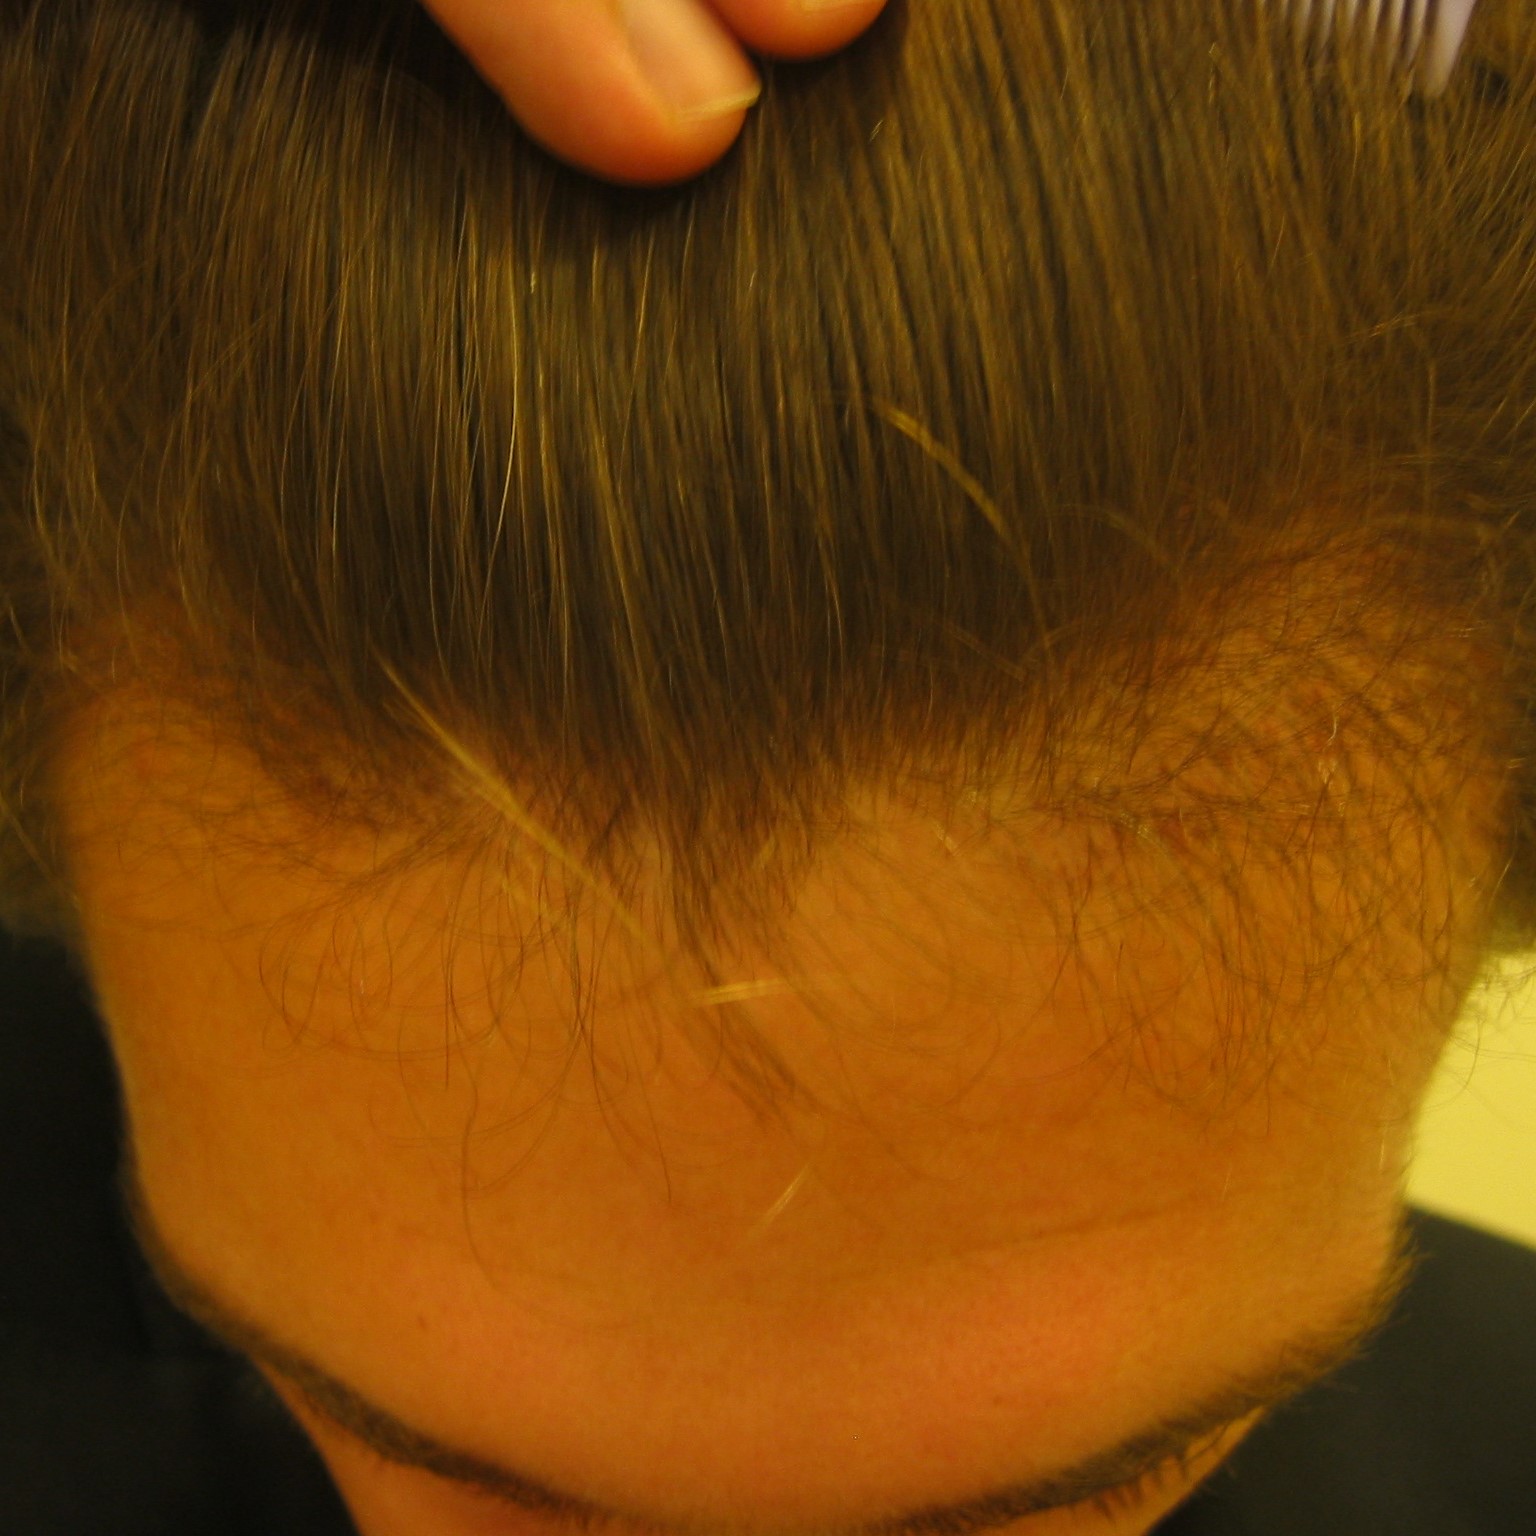 Hair Transplant Timeline: Preparation, Recovery &#038; Results, Wimpole Clinic